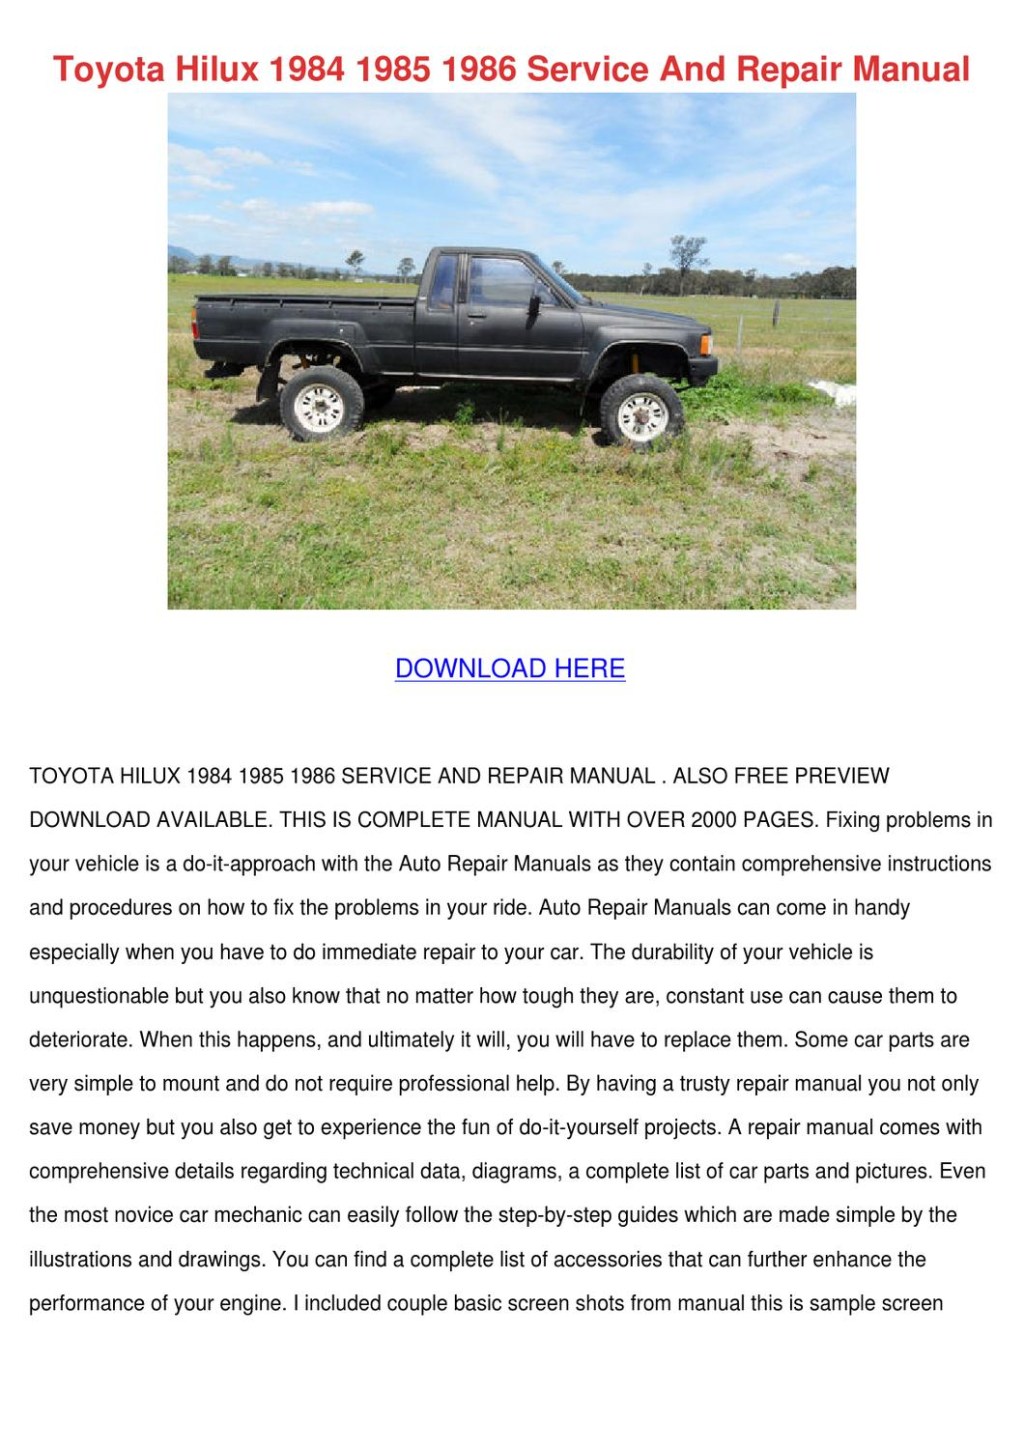 Picture of: Toyota Hilux    Service And Repai by Kasey Lassen – Issuu